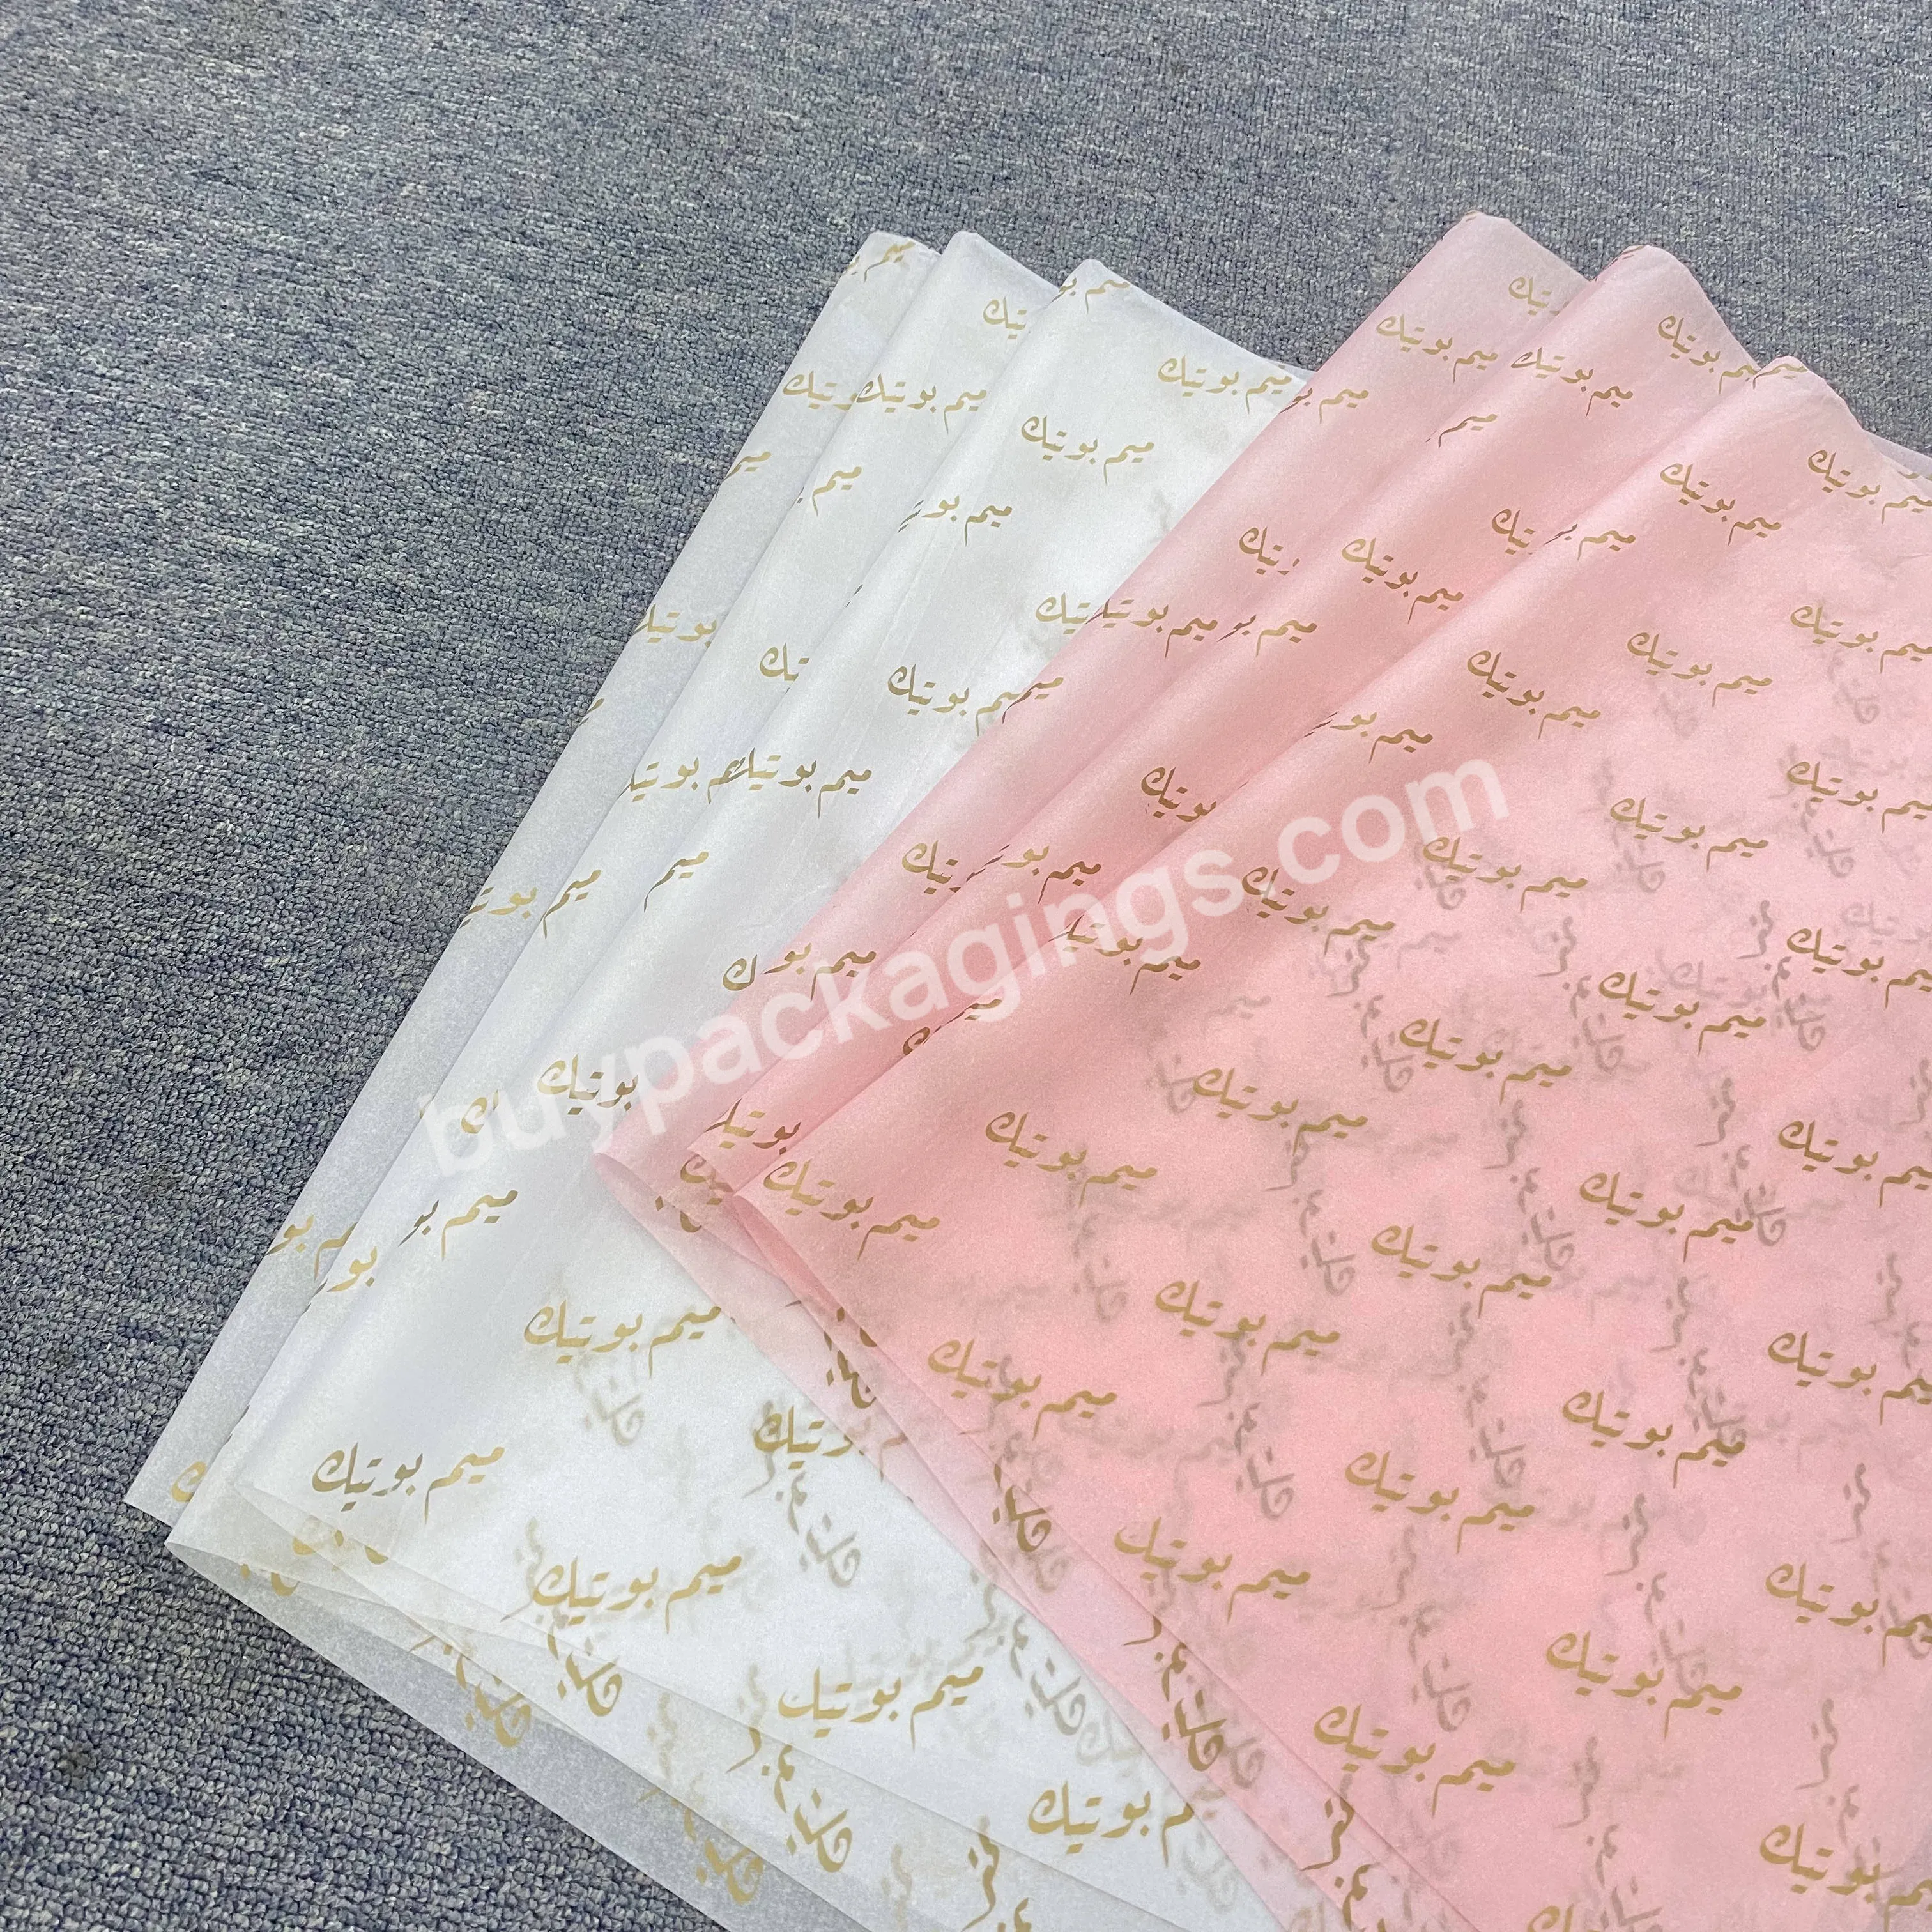 Fashionable Design High Quality Low Moq 17g Wrapping Tissue Paper Customize Any Size Logo Print Luxury Flower Tissue With Brand - Buy High Quality Low Moq 17g Wrapping Tissue Paper,Customize Any Size Logo Print,Luxury Flower Tissue With Brand.